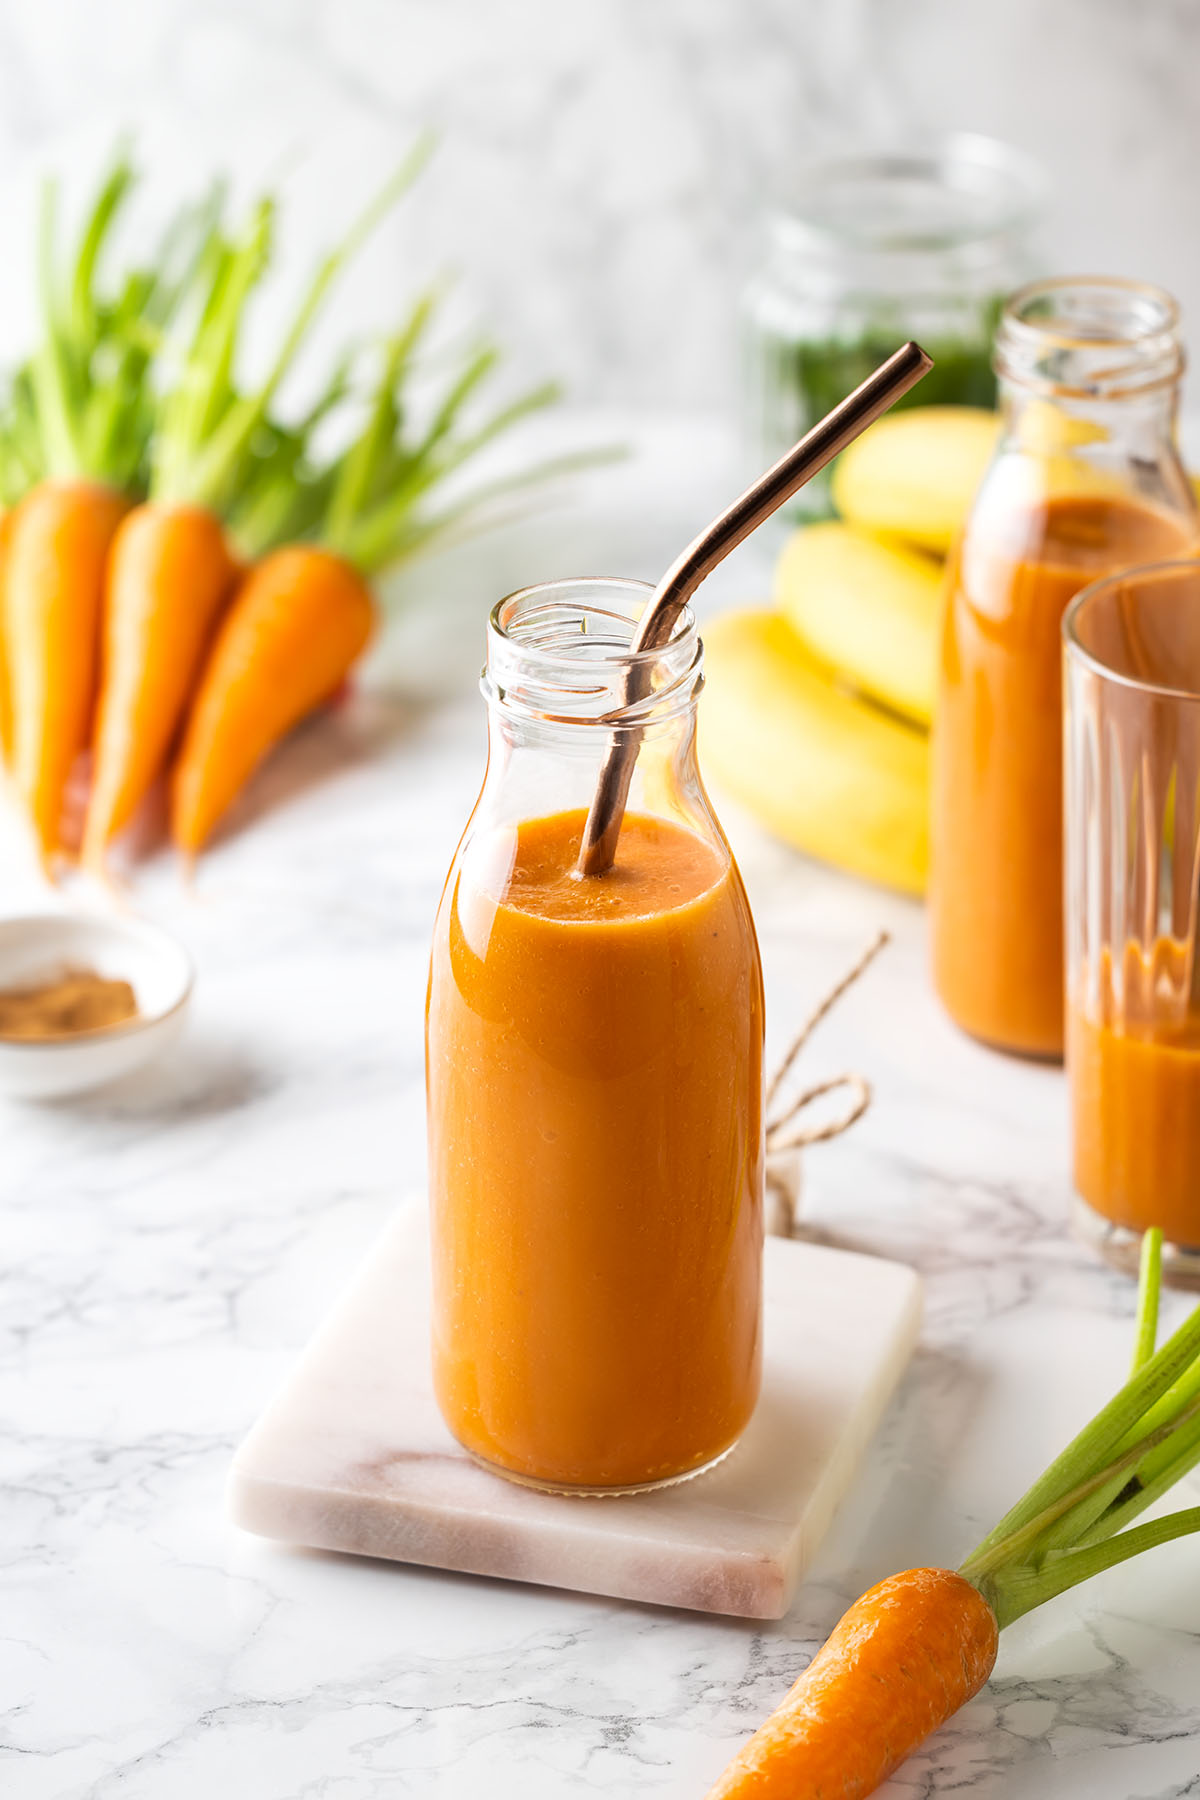 Carrot and Banana Smoothie in a glass bottle with a straw inside